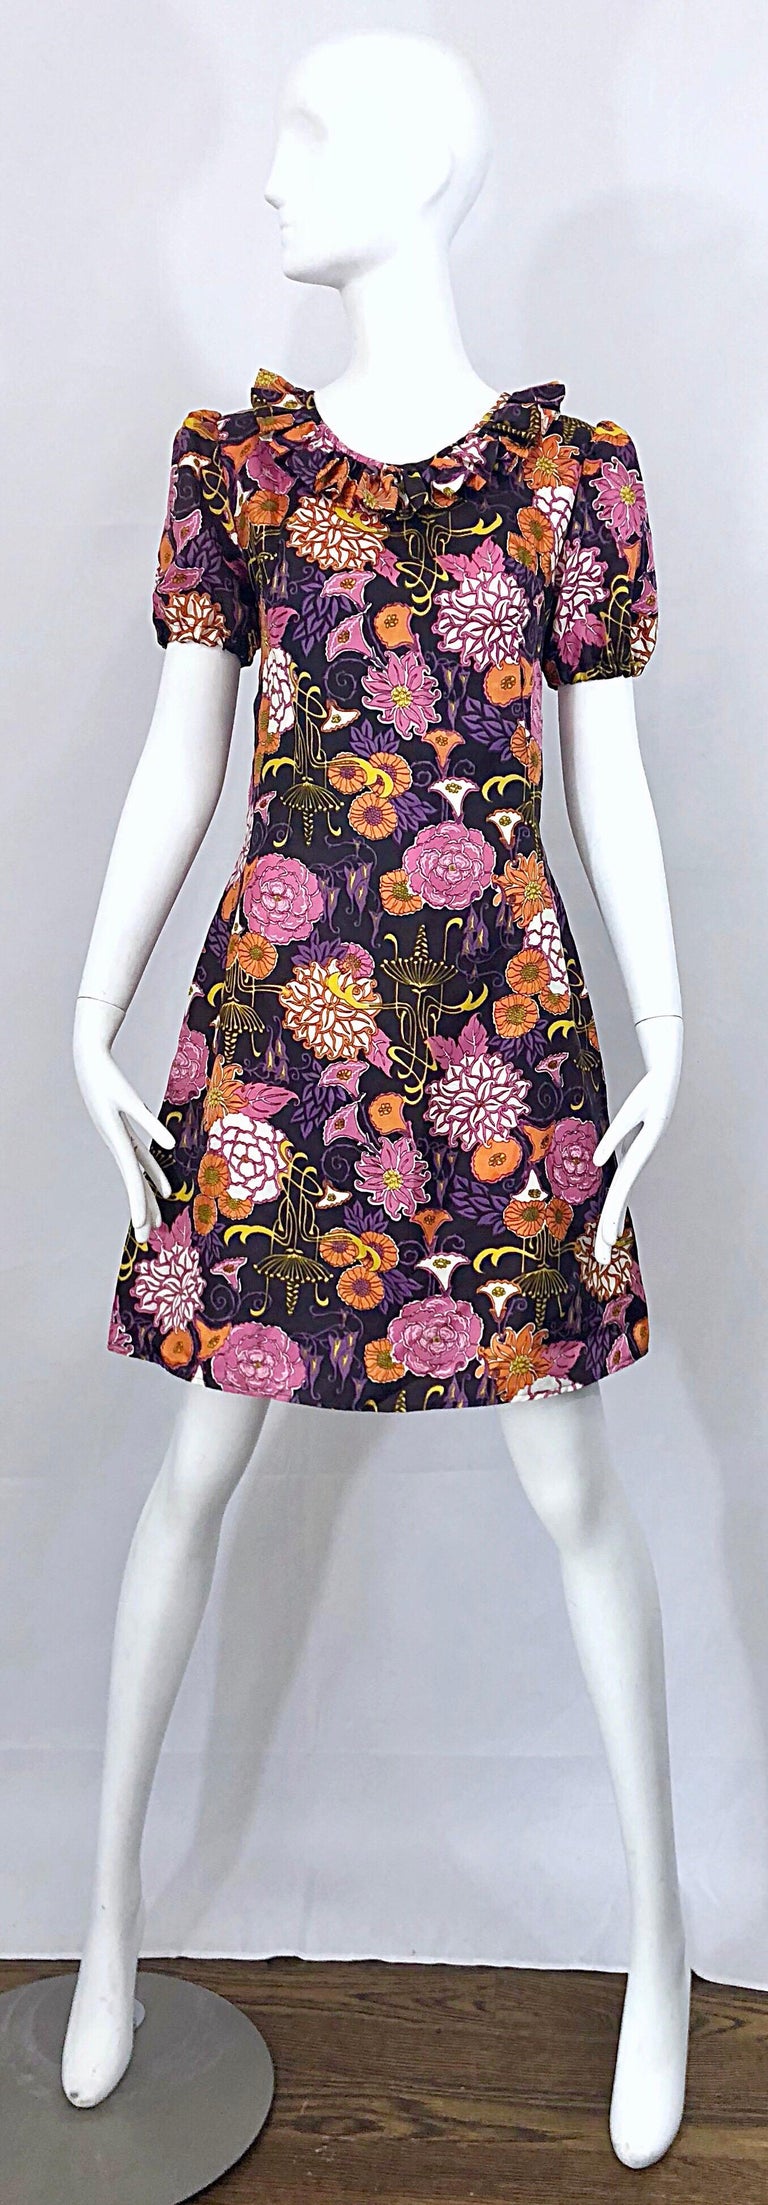 Chic late 1960s lotus orchid novelty flower print short puff sleeve vintage A-Line dress! Features a dark purple background with bubblegum pink, orange, yellow, and lavender purple lotus, orchids and flowers printed throughout. Ruffled collar and